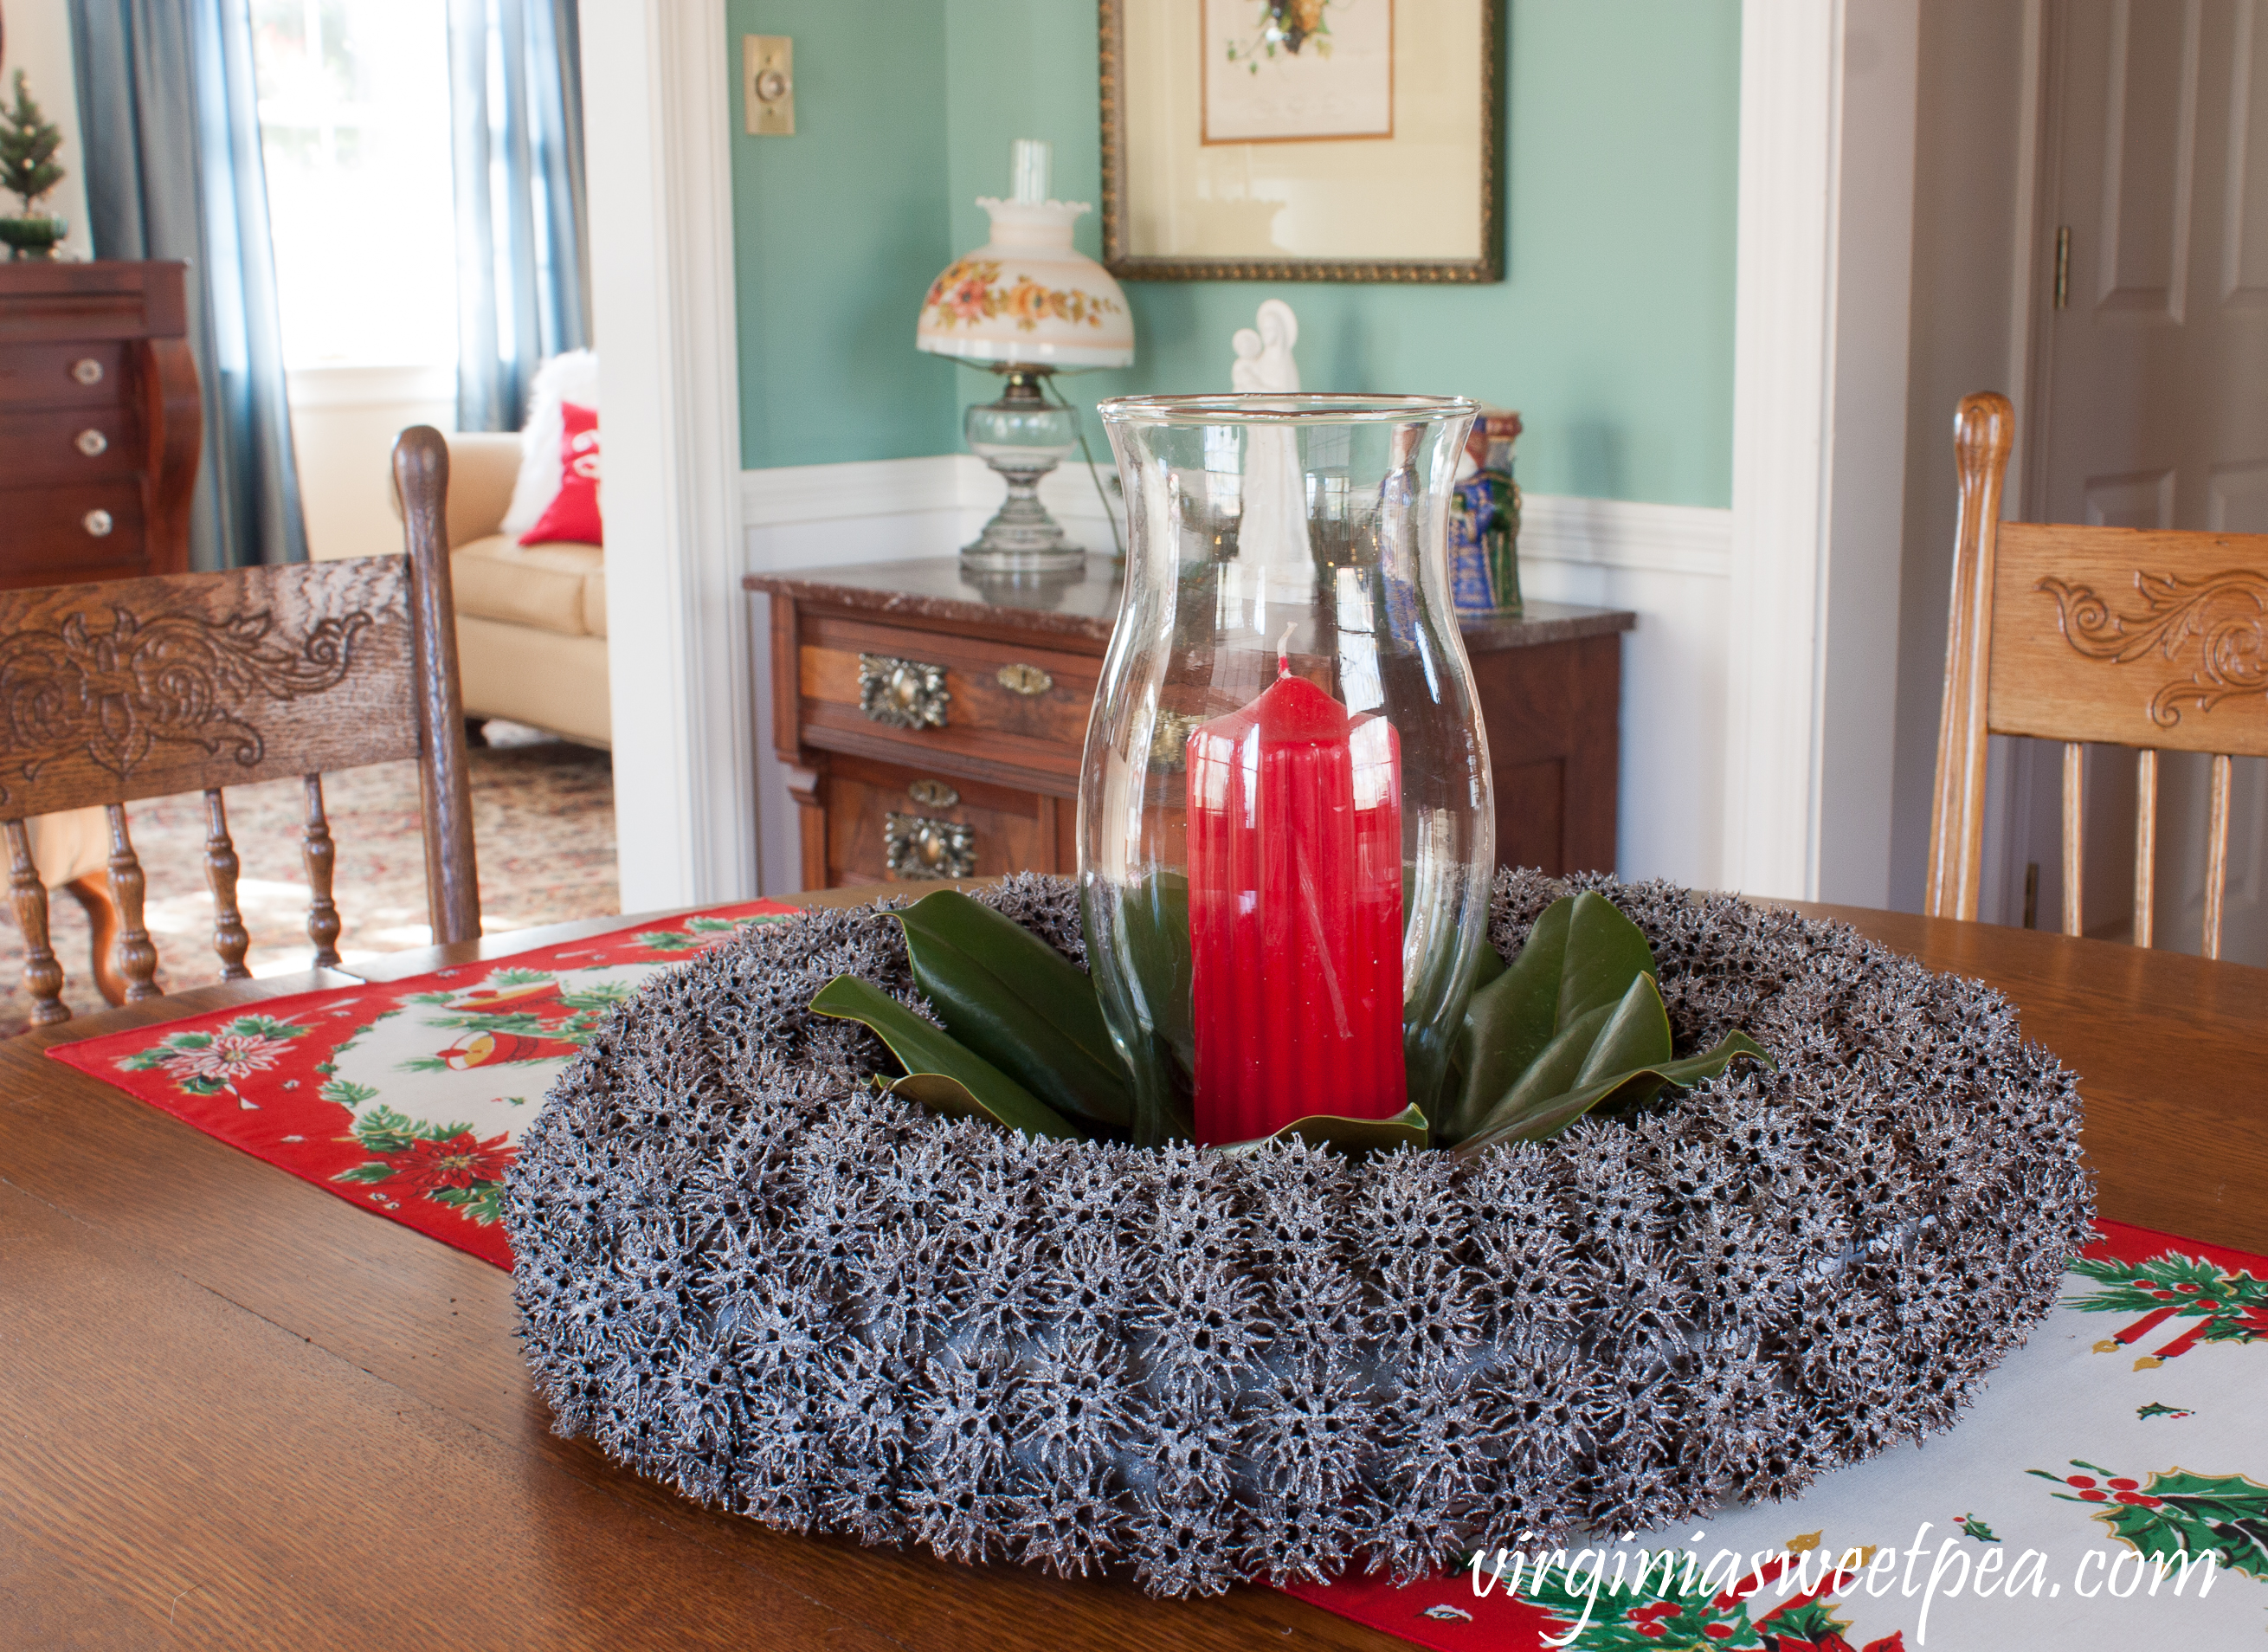 Use a wreath made from Sweet Gum tree seed pods as a table centerpiece.